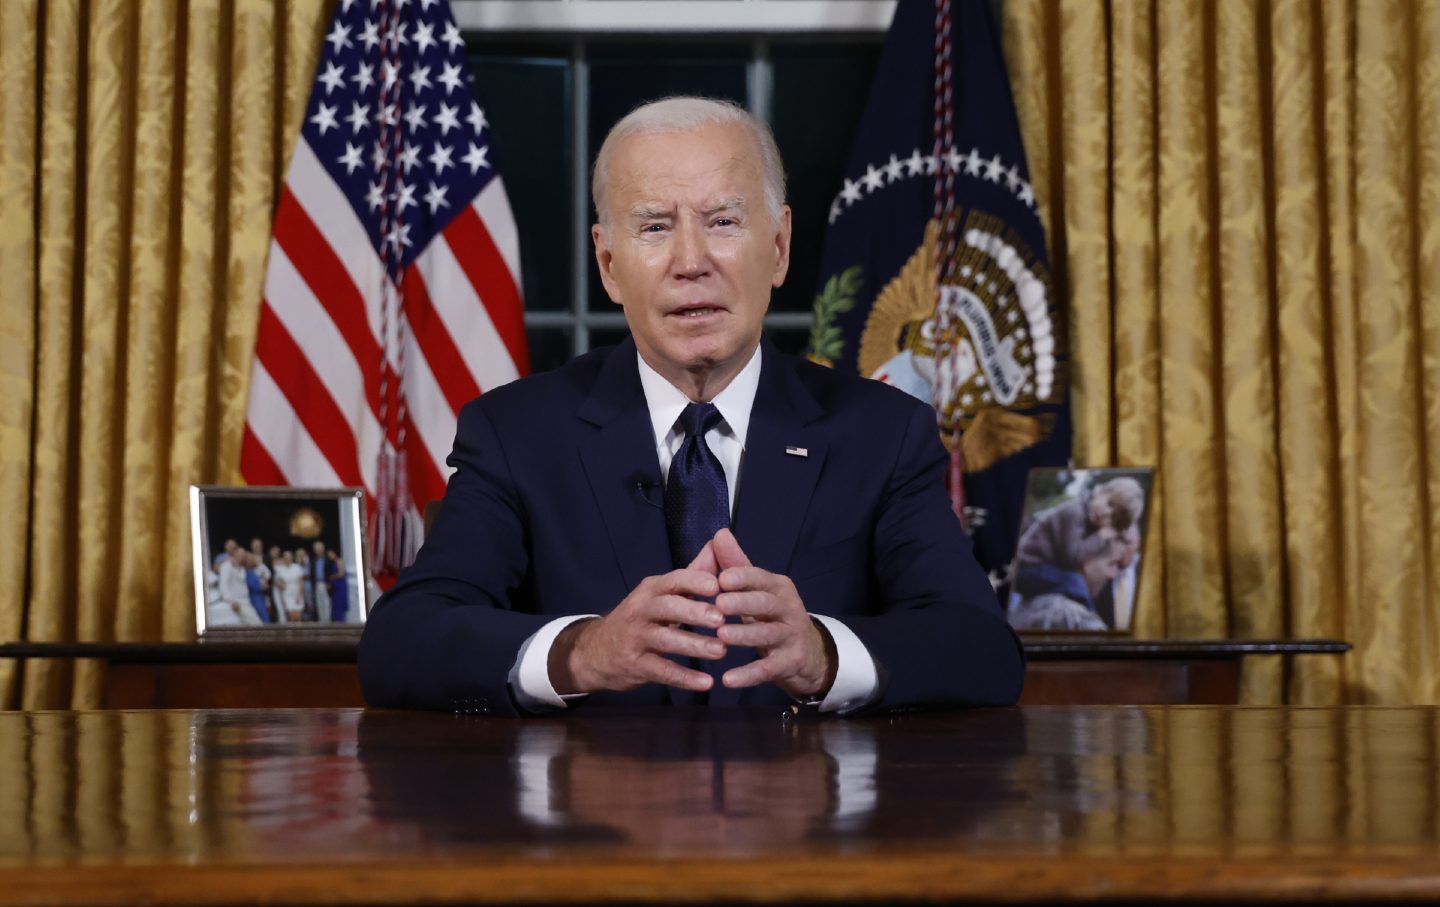 Biden delivers a speech in the Oval Office